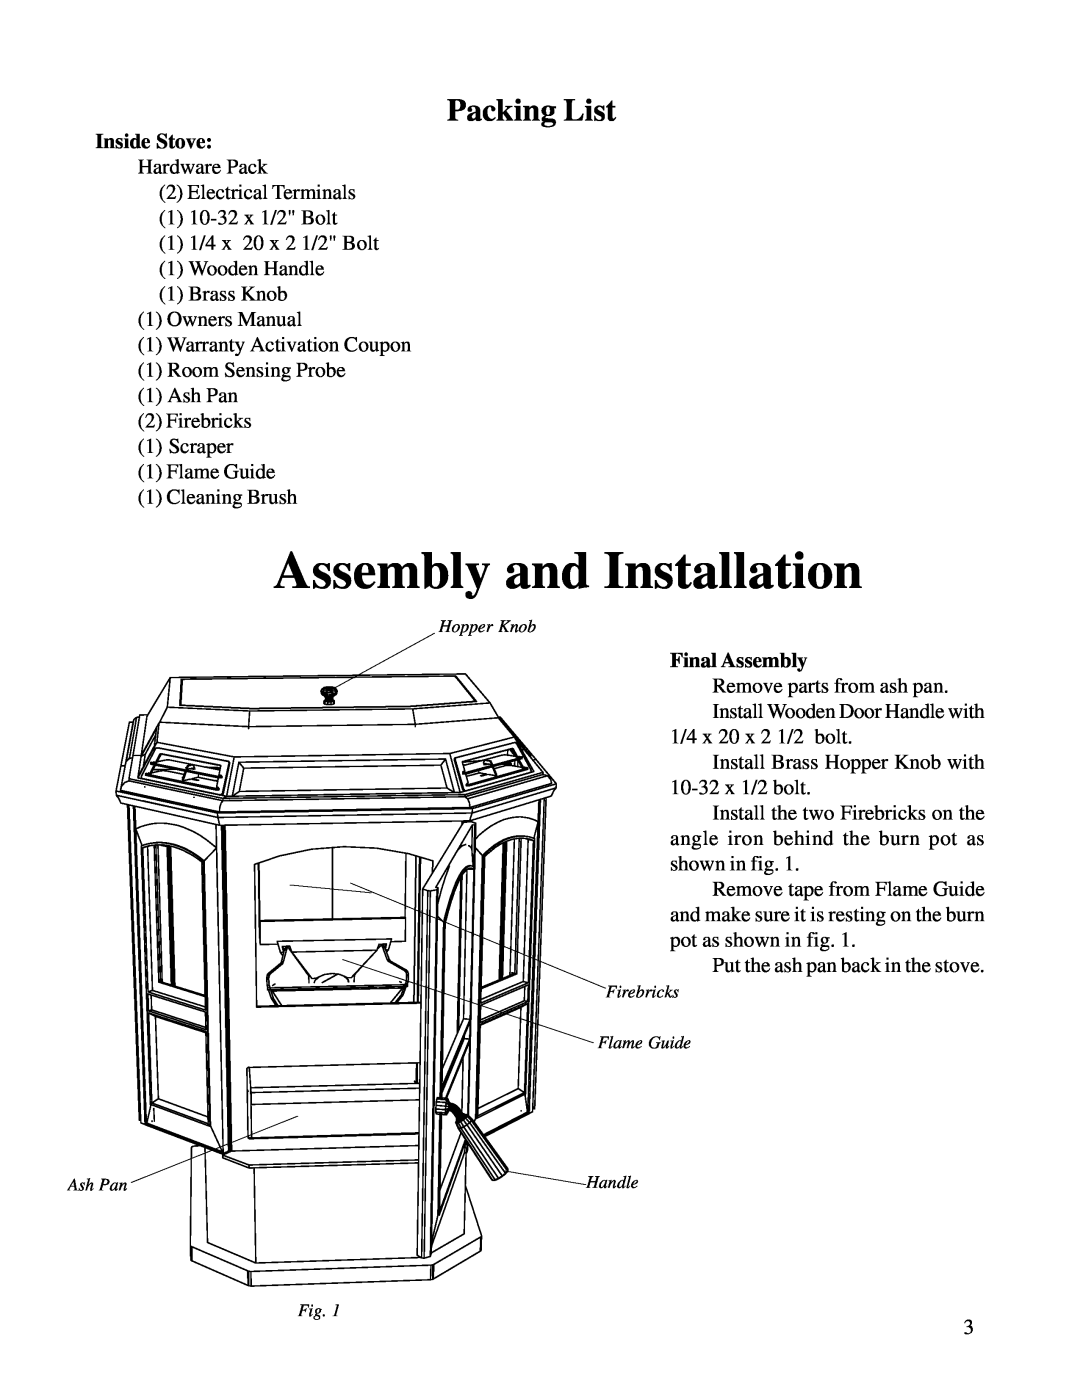 Harman Stove Company R6 owner manual Assembly and Installation, Inside Stove, Final Assembly 